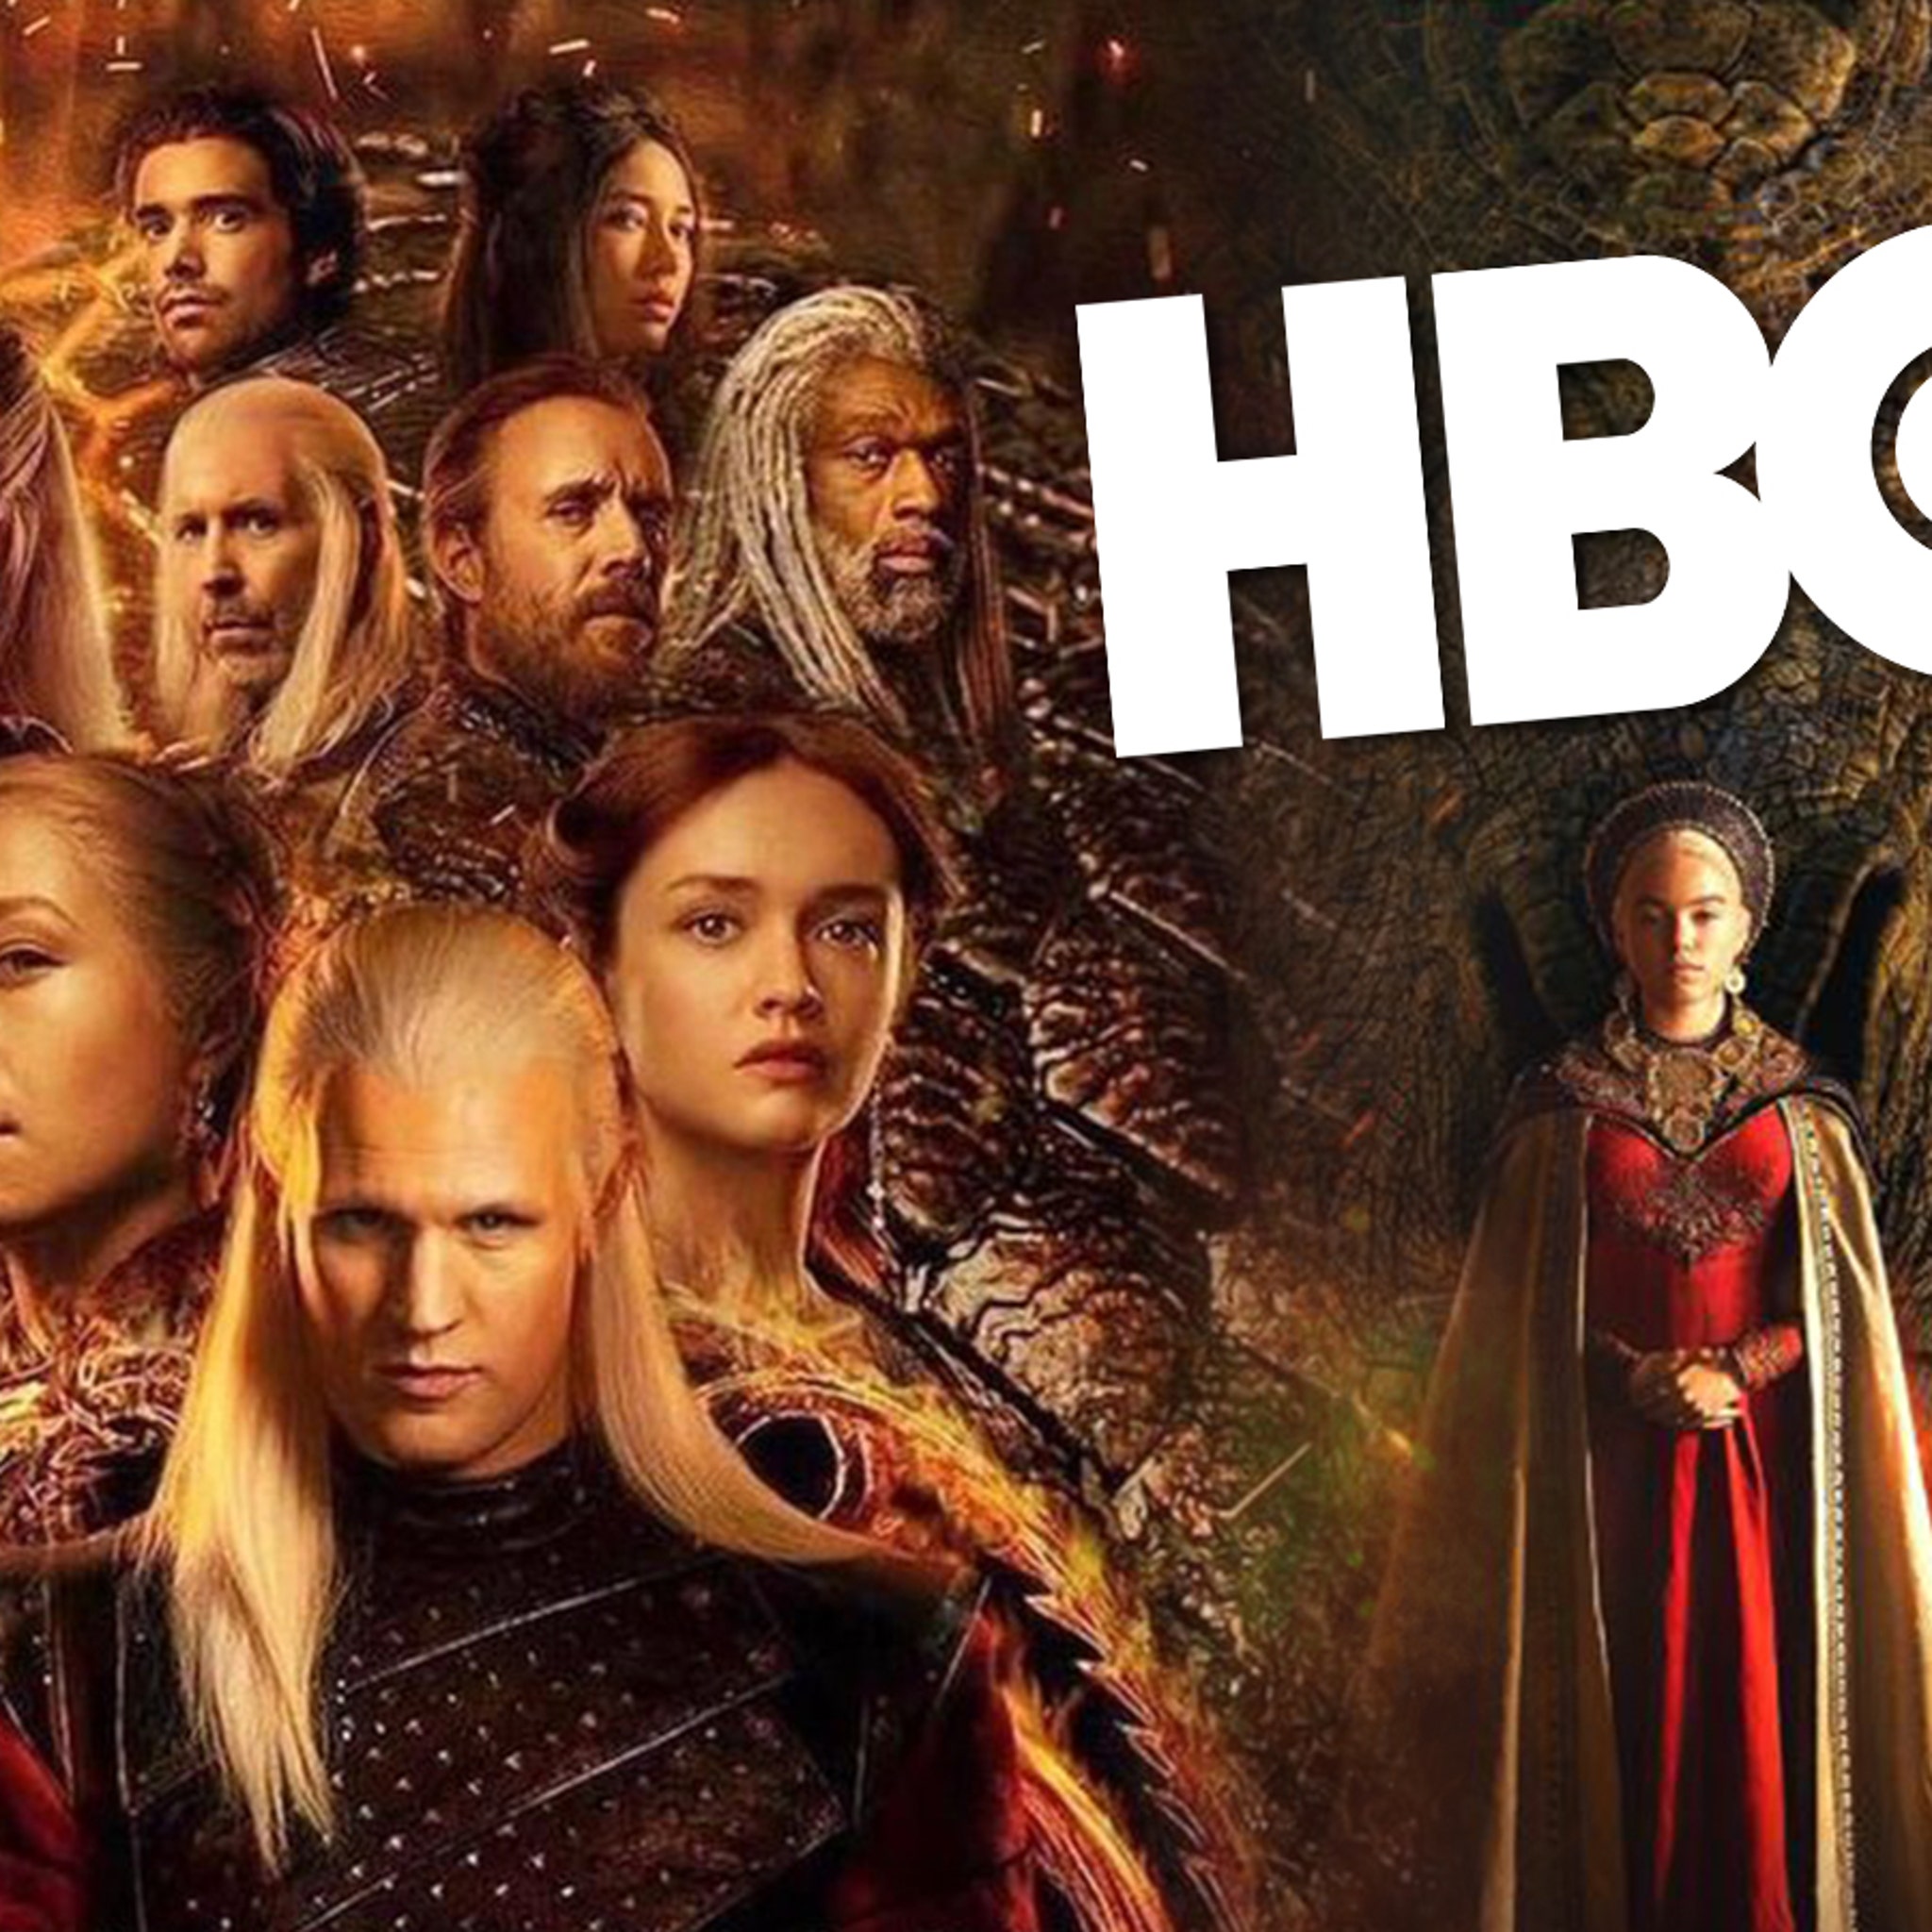 House of the Dragon season 2 episode 1 details leak ahead of time